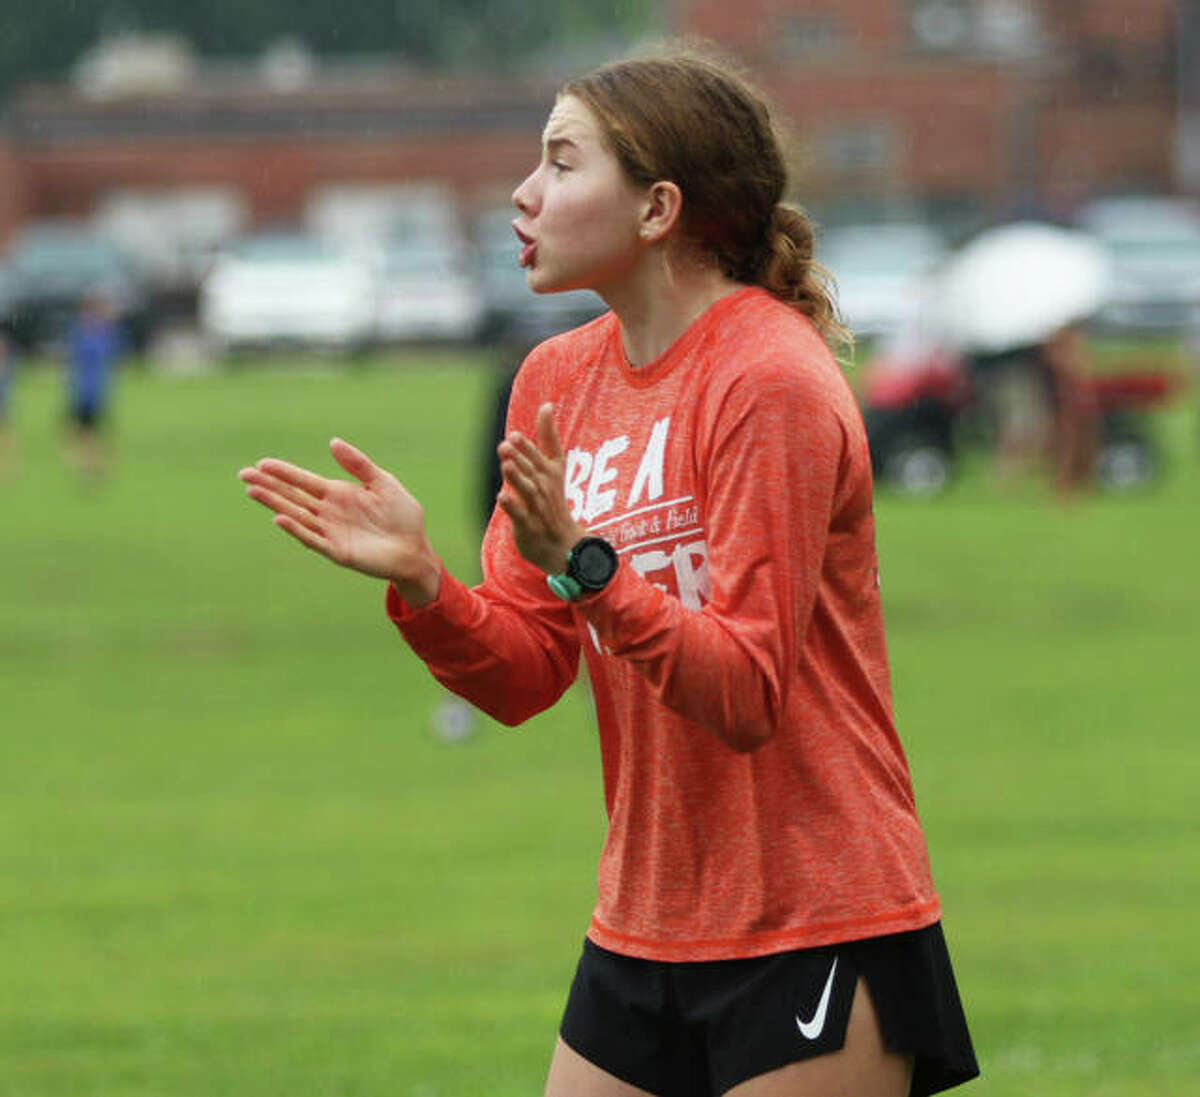 Edwardsville junior Riley Knoyle encourages her teammates approaching the finish at the Granite City Invite on Saturday morning. Knoyle, the 2020 Telegraph Cross Country Runner of the Year last season, is out with an injury.